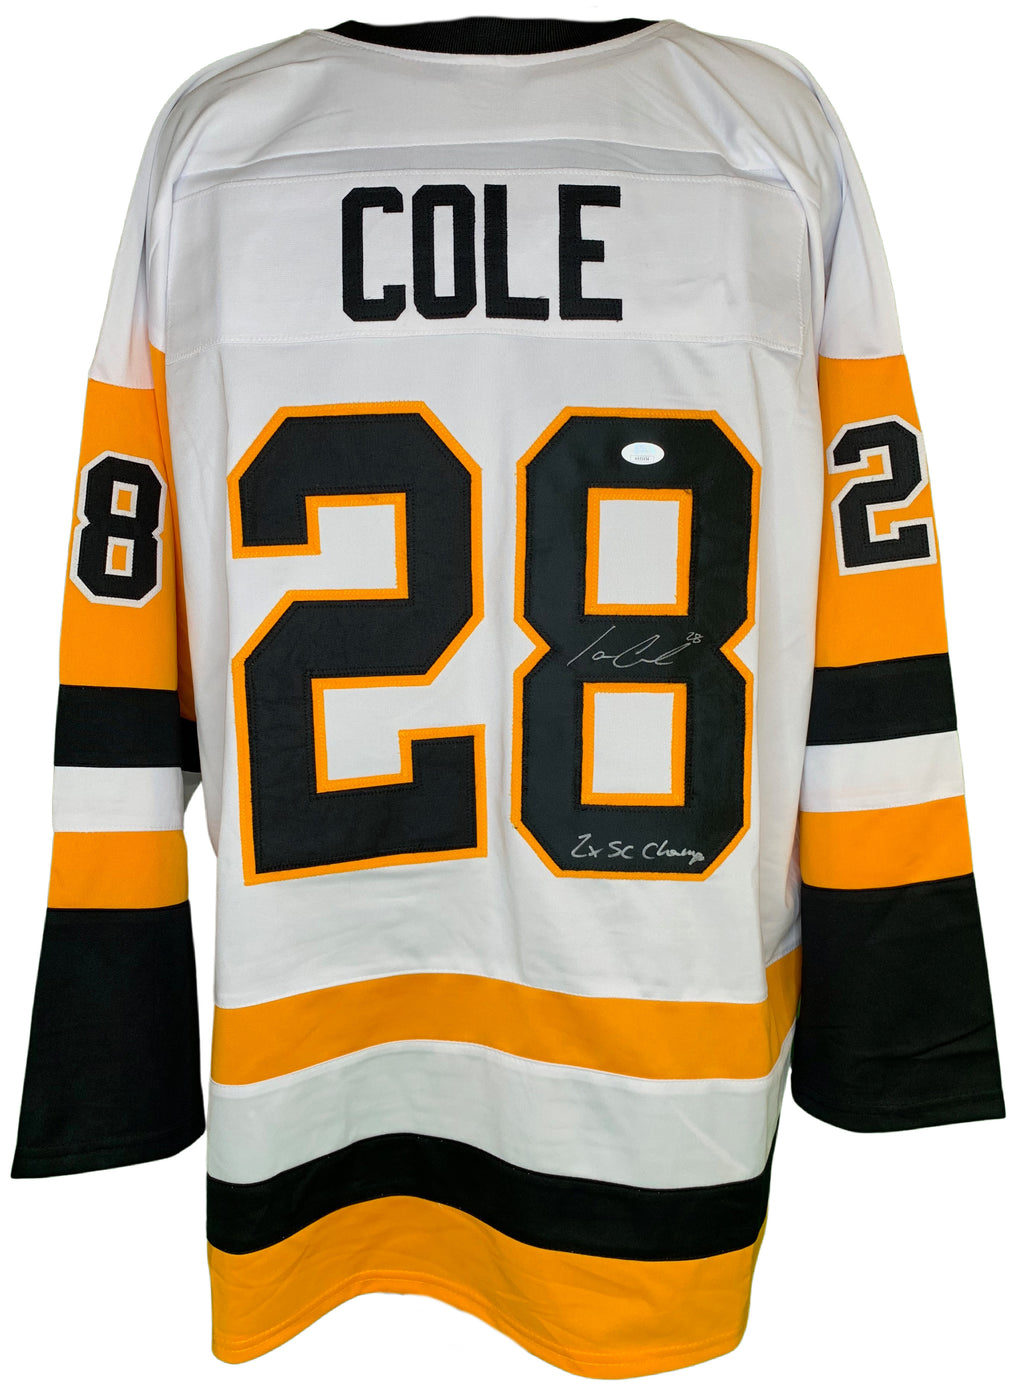 Ian Cole autographed signed inscribed jersey Pittsburgh Penguins JSA COA